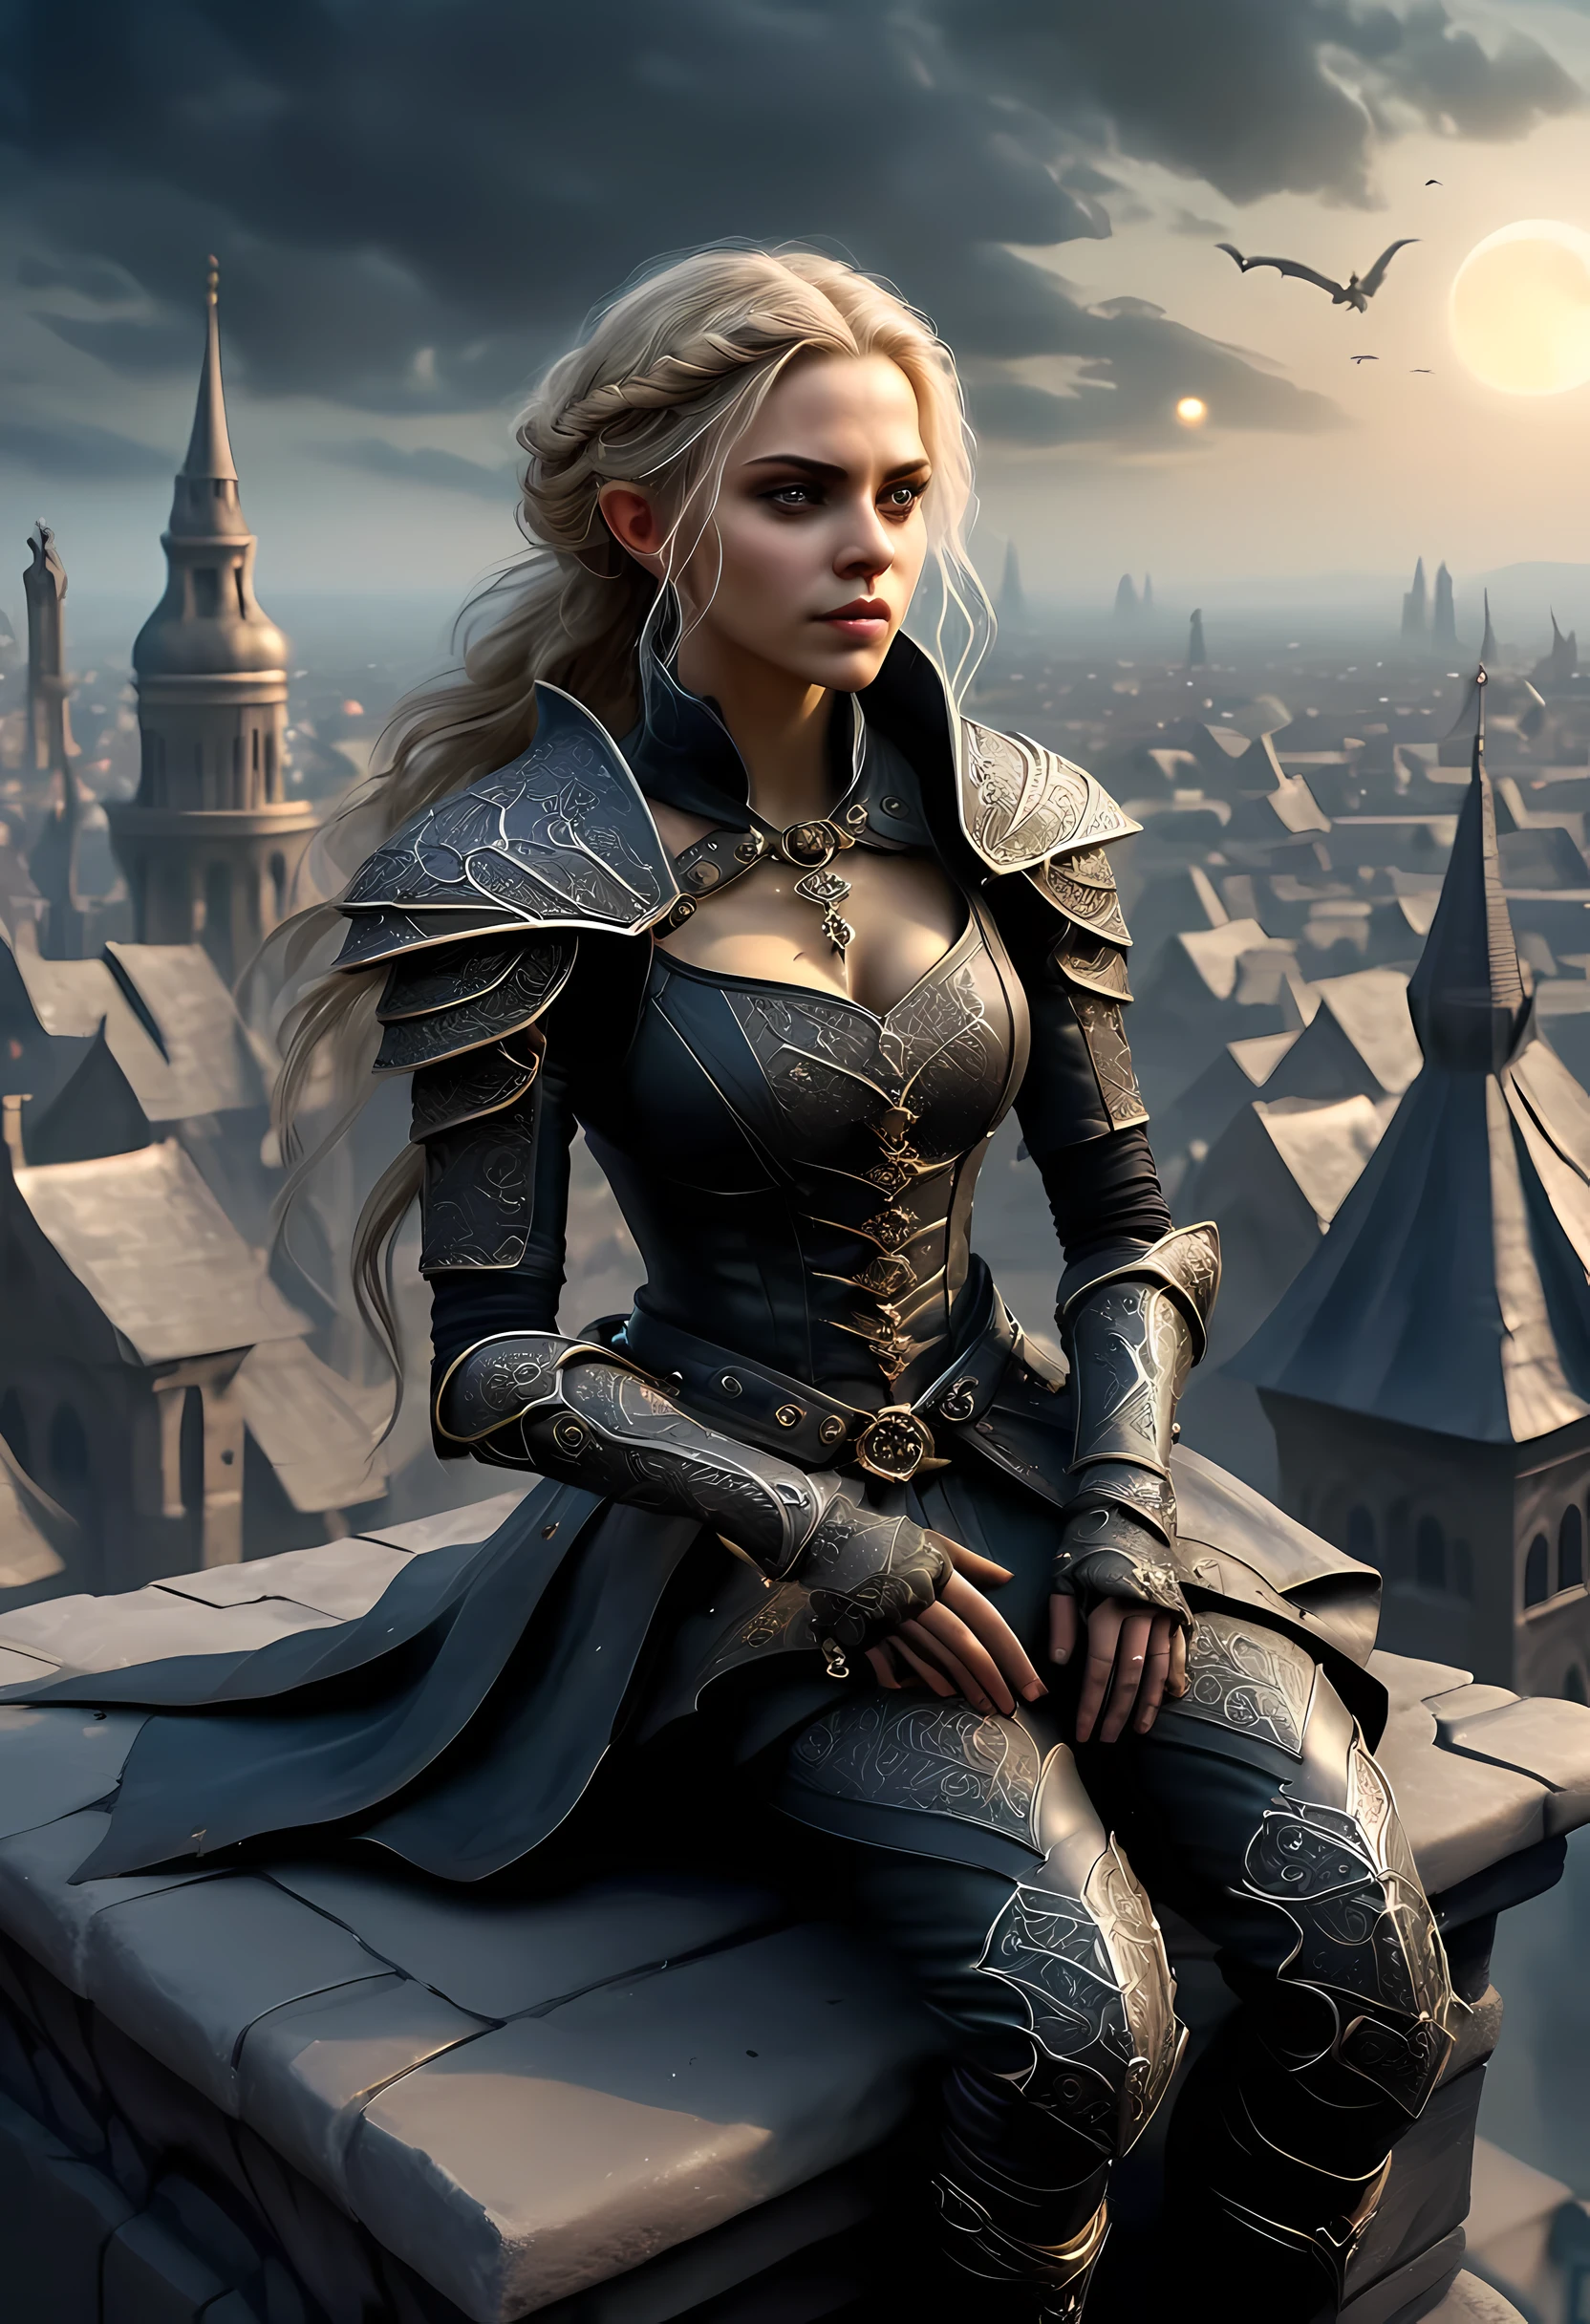 fAntAsy Art, d&d Art, rpg Art, reAlistic Art, goth Art, A, high detAils, best quAlity, 16k, [ultrA detAiled], mAsterpiece, best quAlity, (extremely detAiled), dynAmic Angle, 生的, photoreAlistic, A picture of An epic fAntAsy thief , 跪在屋頂上 (best detAils, MAsterpiece, best quAlity: 1.5) on top of A roof in goth fAntAsy city, reAdy for Action, 很多建築物, A temple (best detAils, MAsterpiece, best quAlity: 1.5), femAle elf (best detAils, MAsterpiece, best quAlity: 1.5), epic fAntAsy thief, [[AnAtomicAlly correct]], blond hAir, brAided hAir, fAir skin, 強烈明亮的眼睛, Armed with dAgger, dynAmic position (intricAte detAils, MAsterpiece, best quAlity: 1.5), smAll pointed eArs, dArk Armor, full leAther Armor (intricAte detAils, MAsterpiece, best quAlity: 1.5), tense Atmosphere, 夜晚, stArs light, 月光, moon rAys, stArs, best detAils, best quAlity, 高解析度, ultrA wide Angle, drkfntAsy 夜晚 over the roof top of A goth church, the elf wAtches the city below,  it is reAdy to Act, medievAl city bAckground